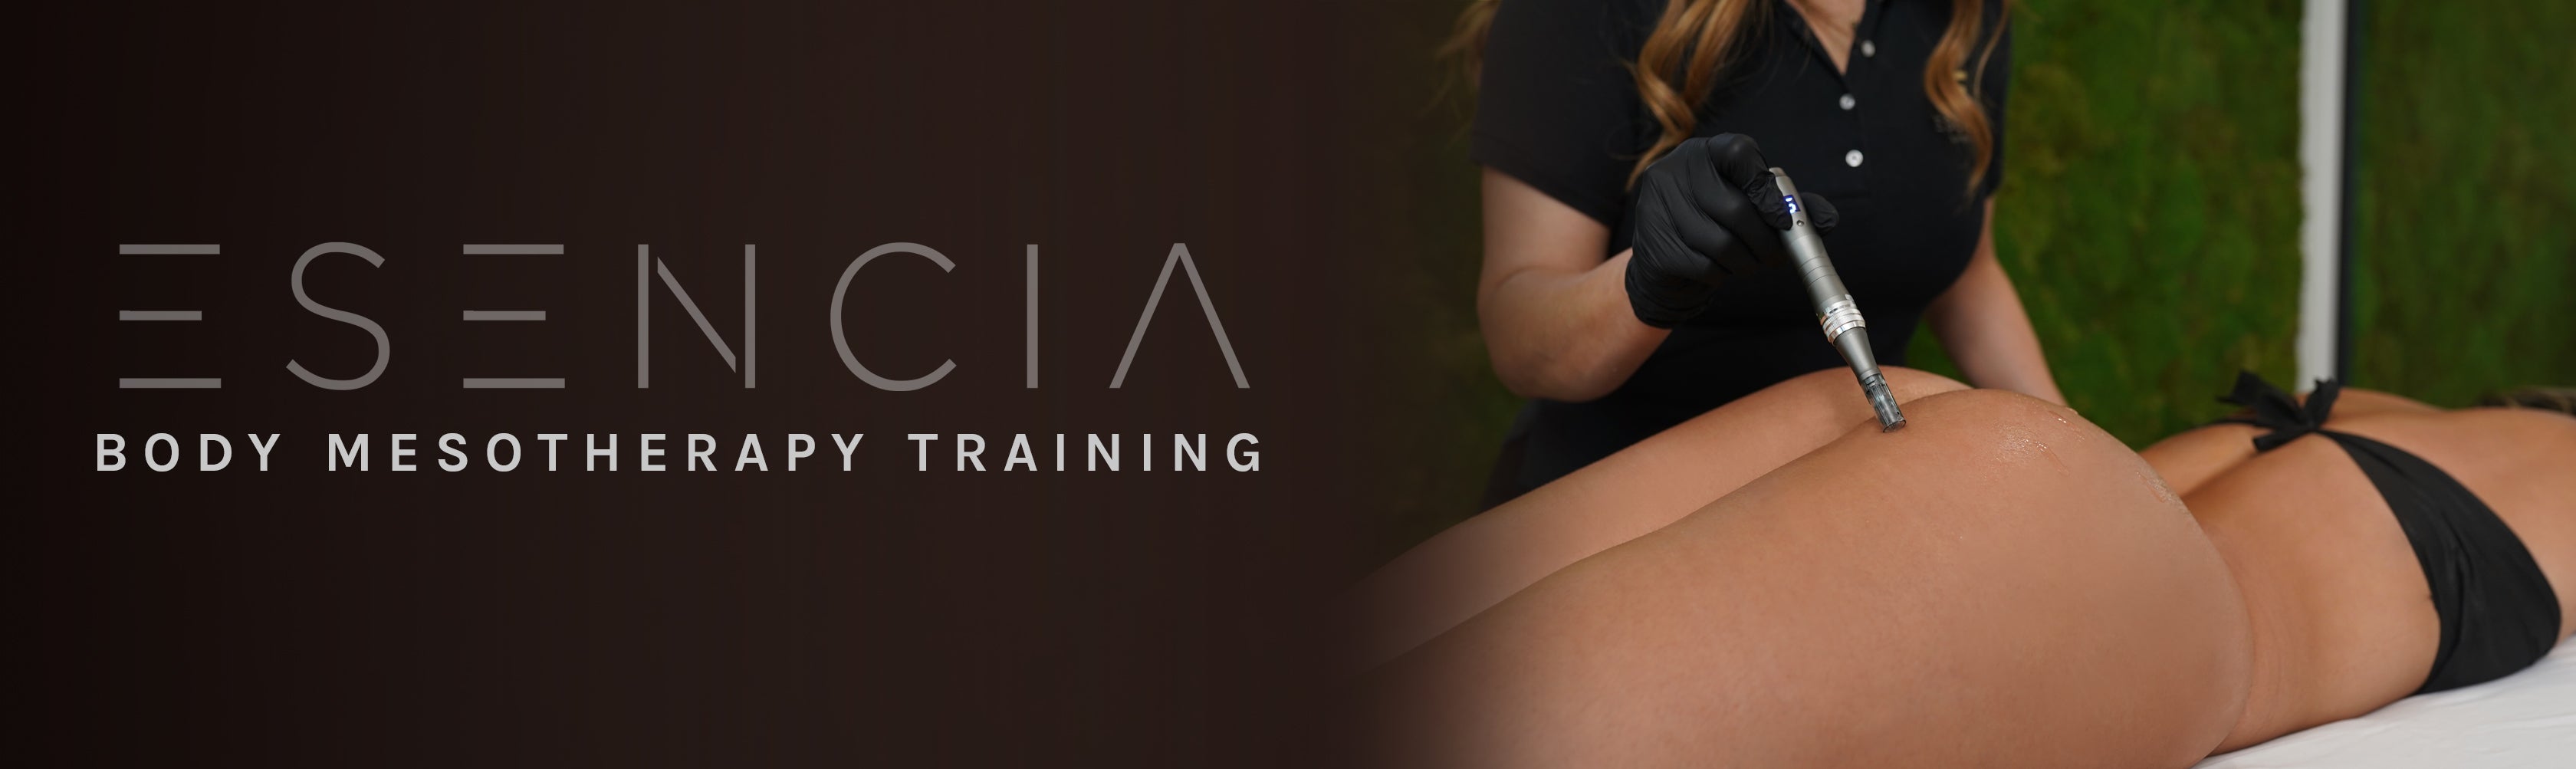 Body Mesotherapy Training